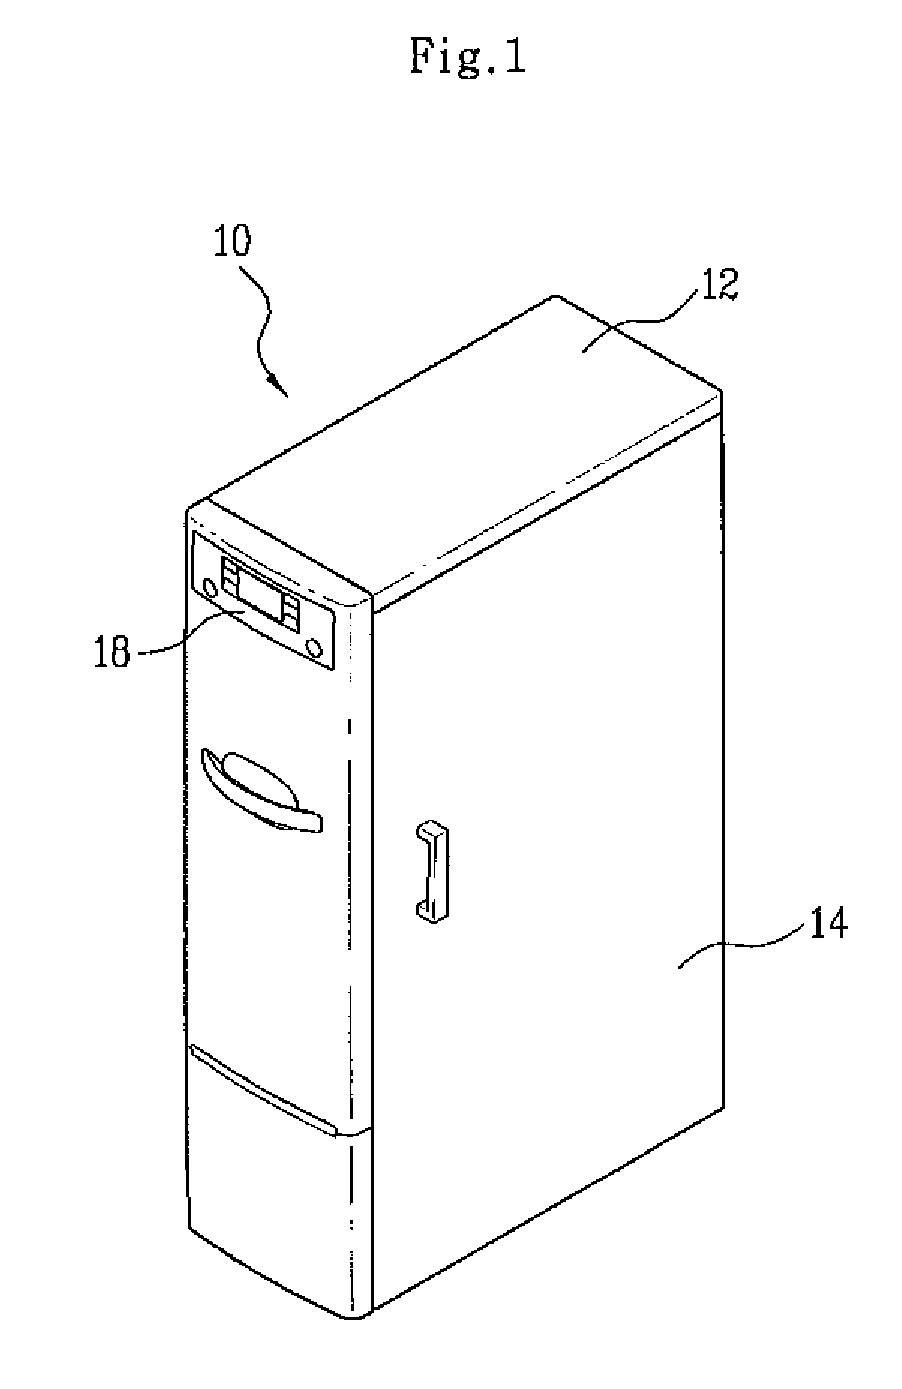 Supplemental clothes treating apparatus